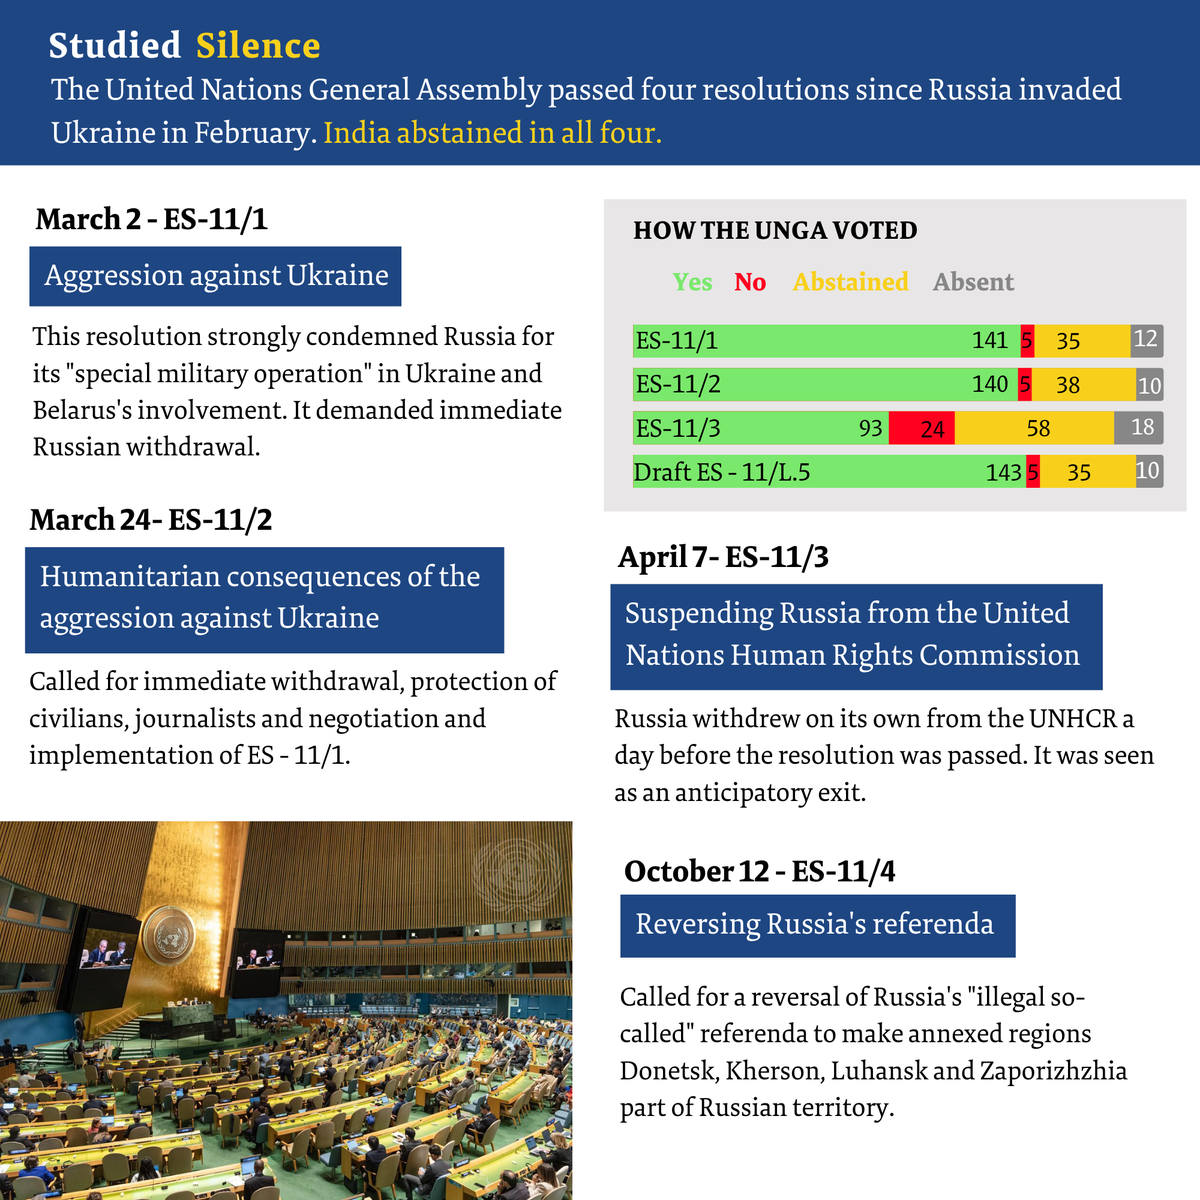 The United Nations General Assembly’s past resolutions and how India voted